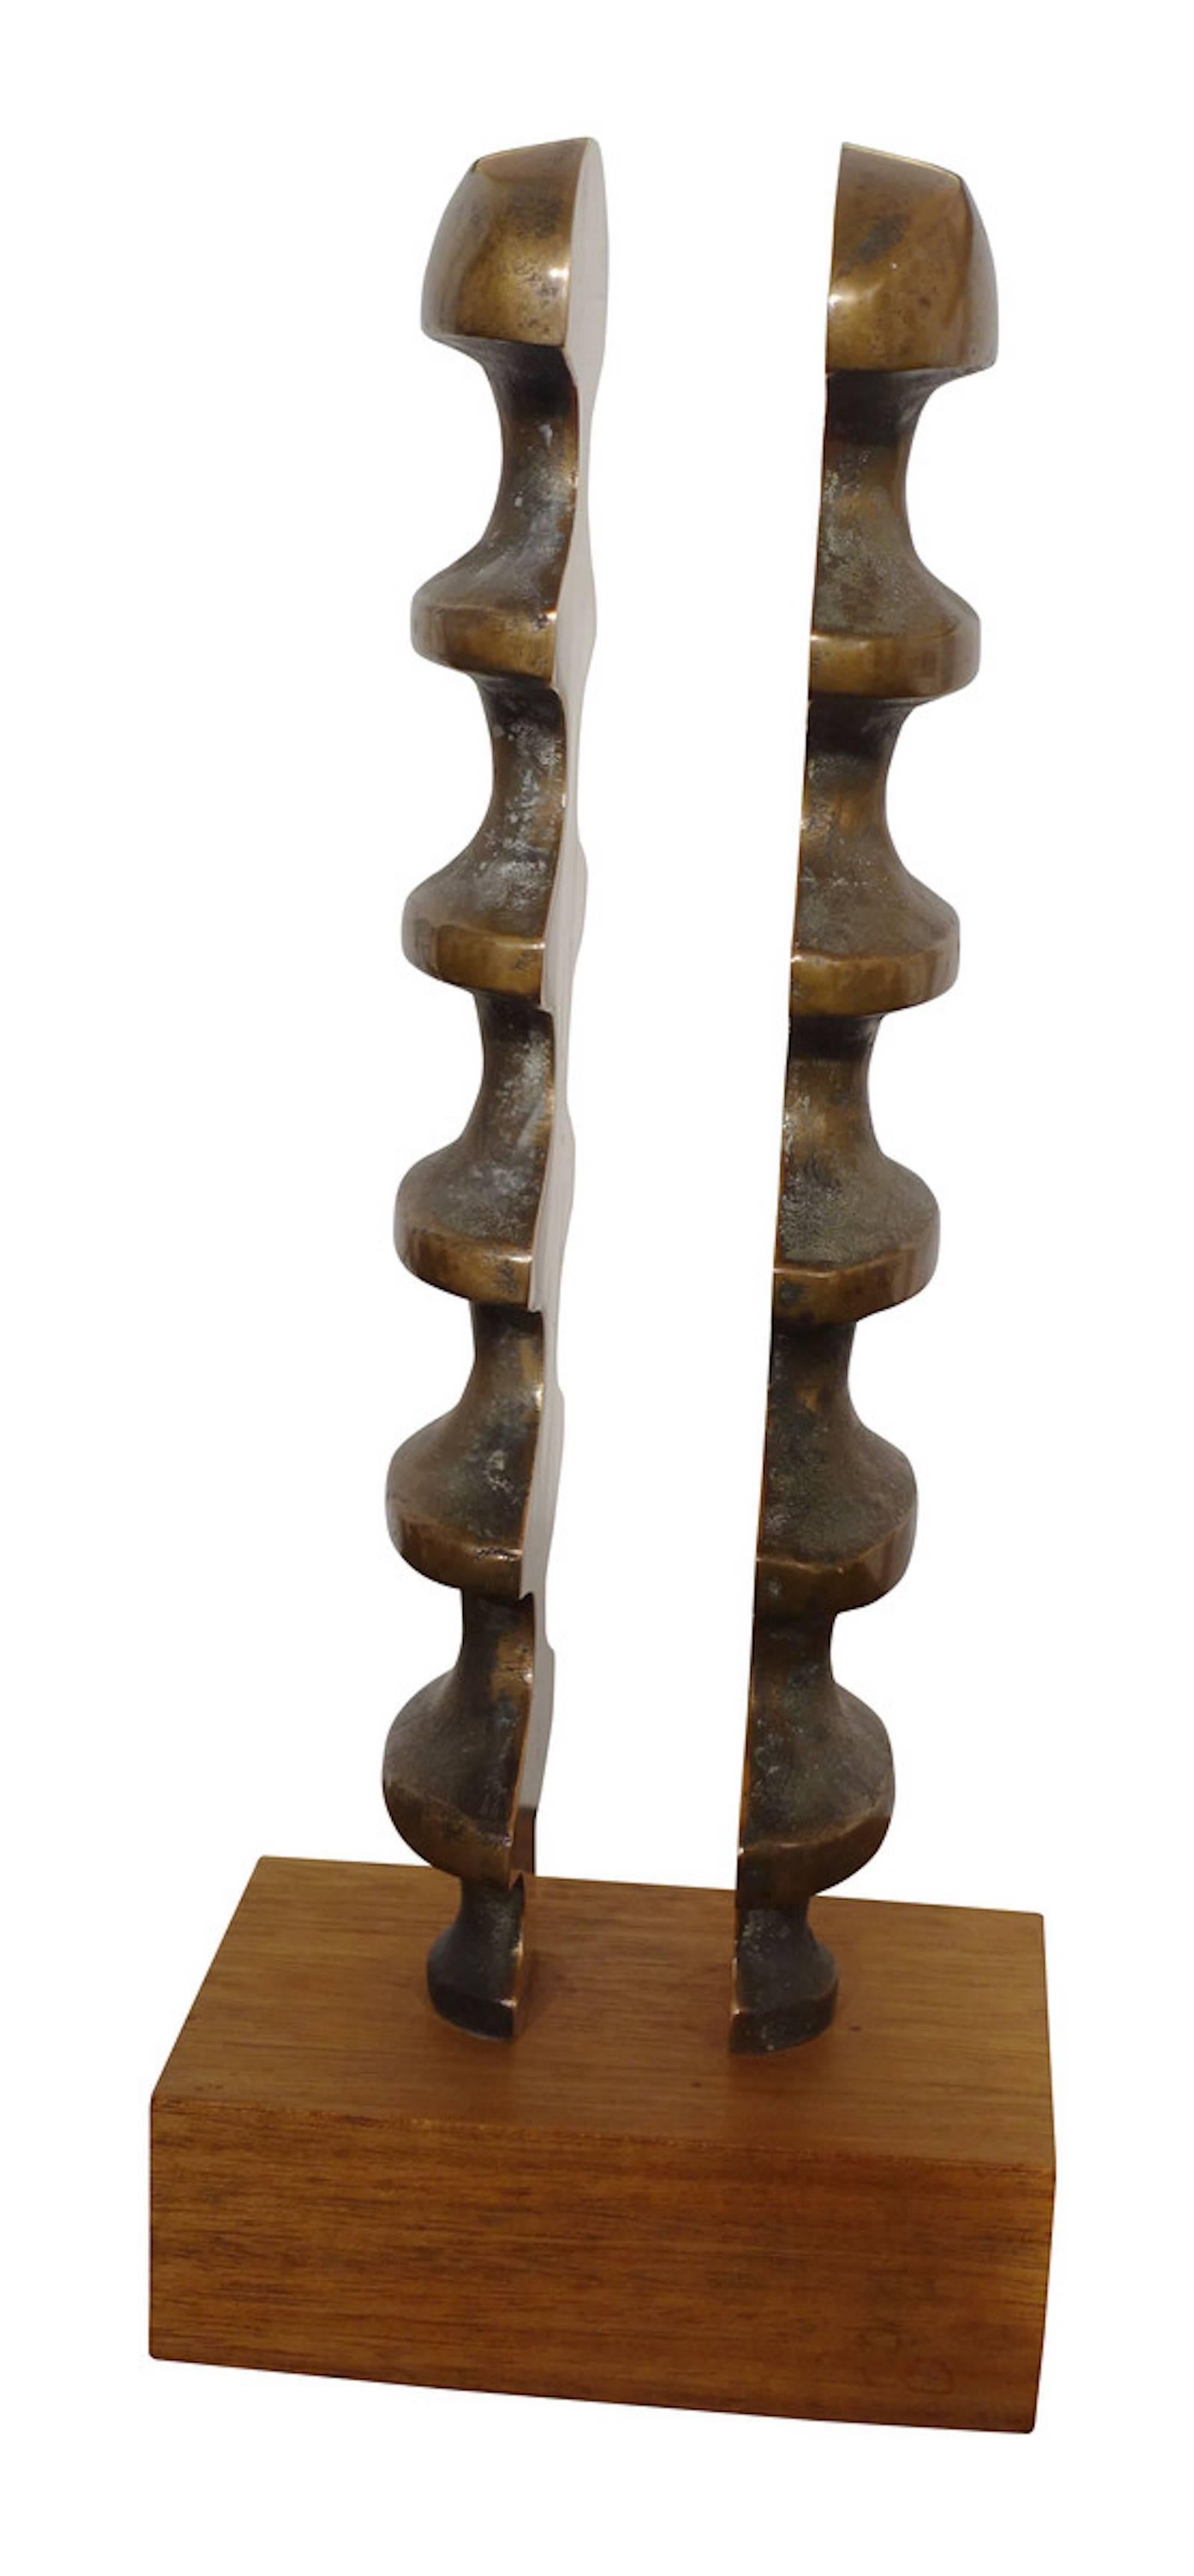 English sculptor Neil Willis (1932-2011) bronze abstract on wooden base.
Base measures: 6